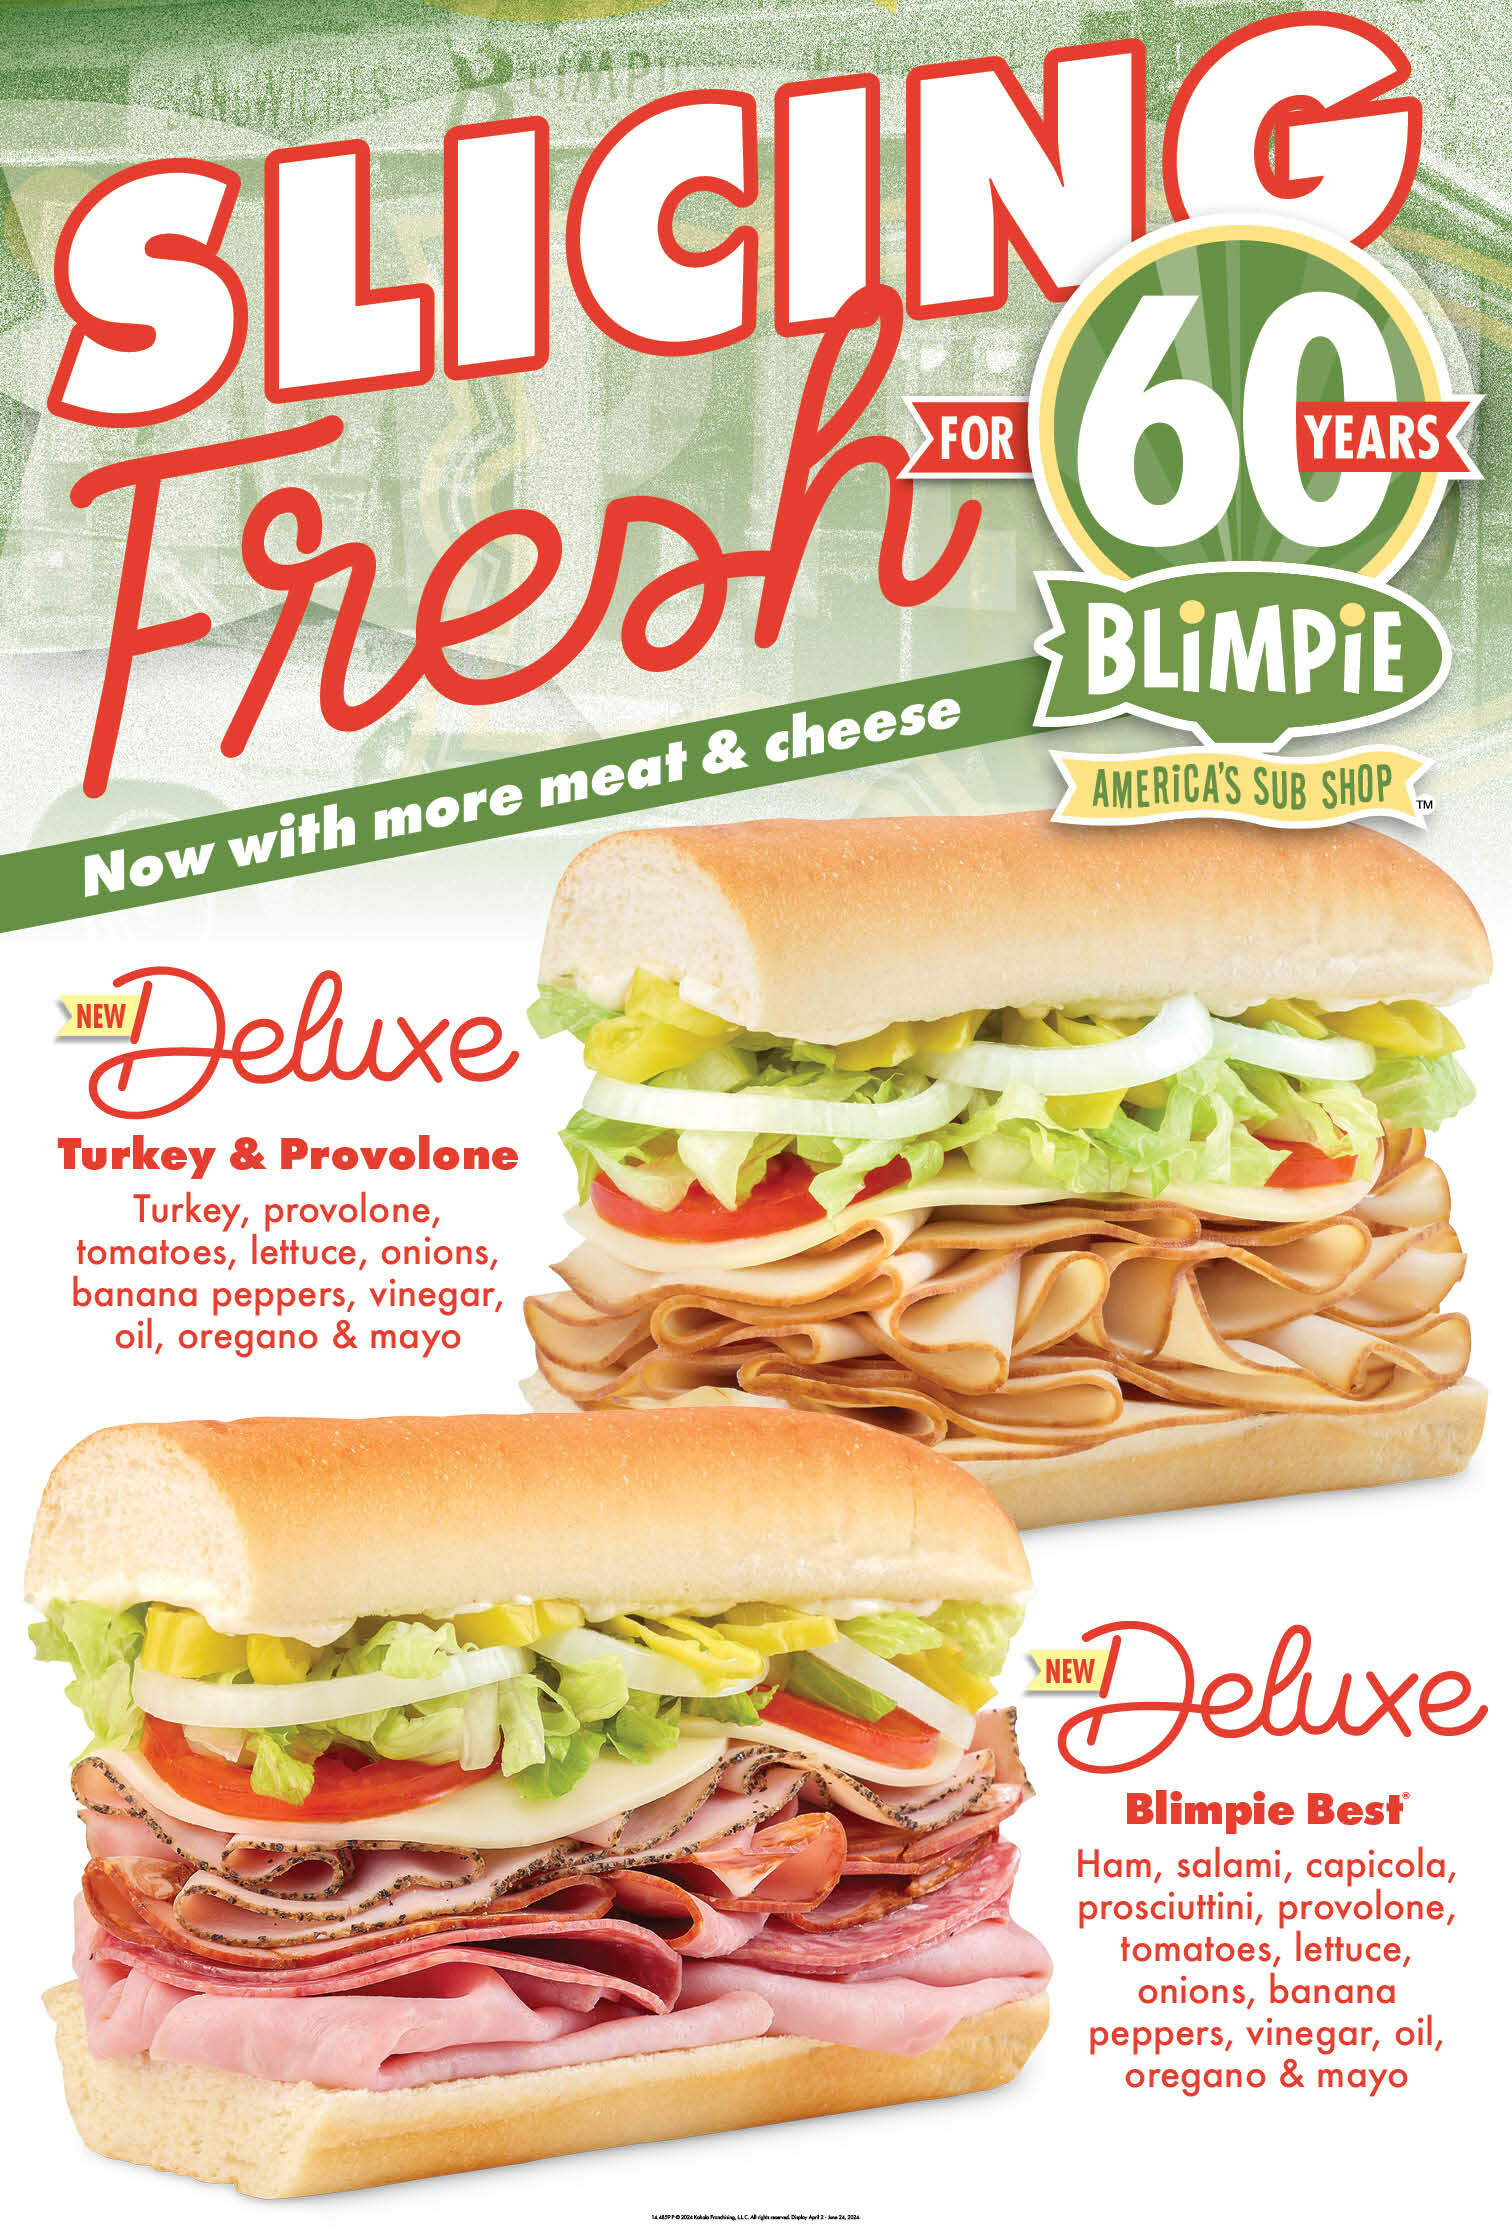 Blimpie's New Deluxe Turkey & Provolone and Deluxe Blimpie Best, featuring more meat and cheese